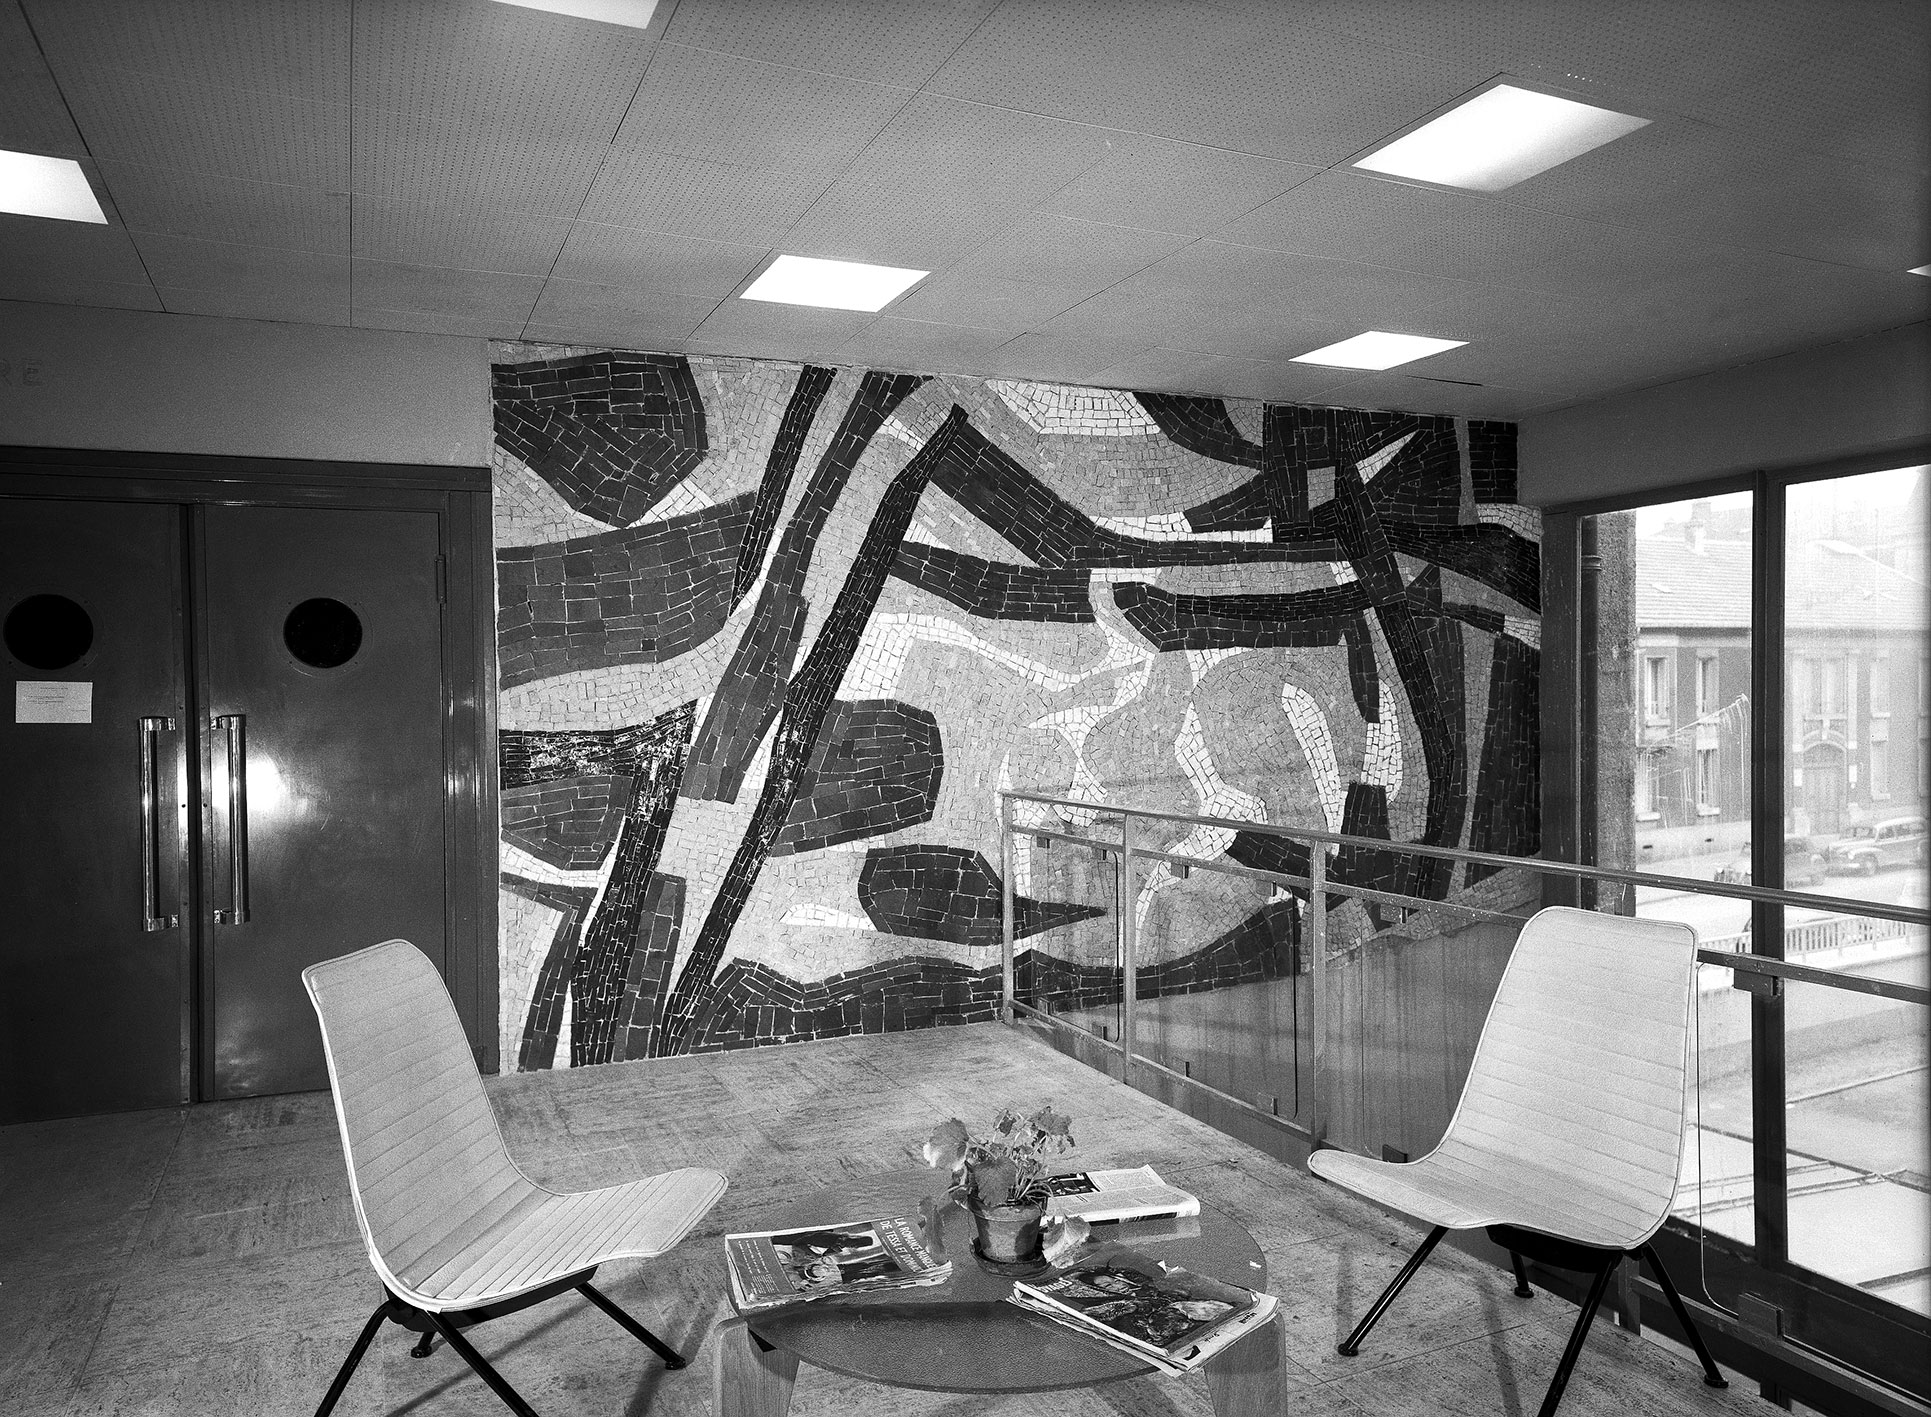 Centre de Réadaptation Fonctionnelle, Nancy (architects R. Lamoise and R. Malot, 1955–1958). Conversation corner fitted out with Fauteuils Légers no. 356 with a cushioned sheath in imitation leather.